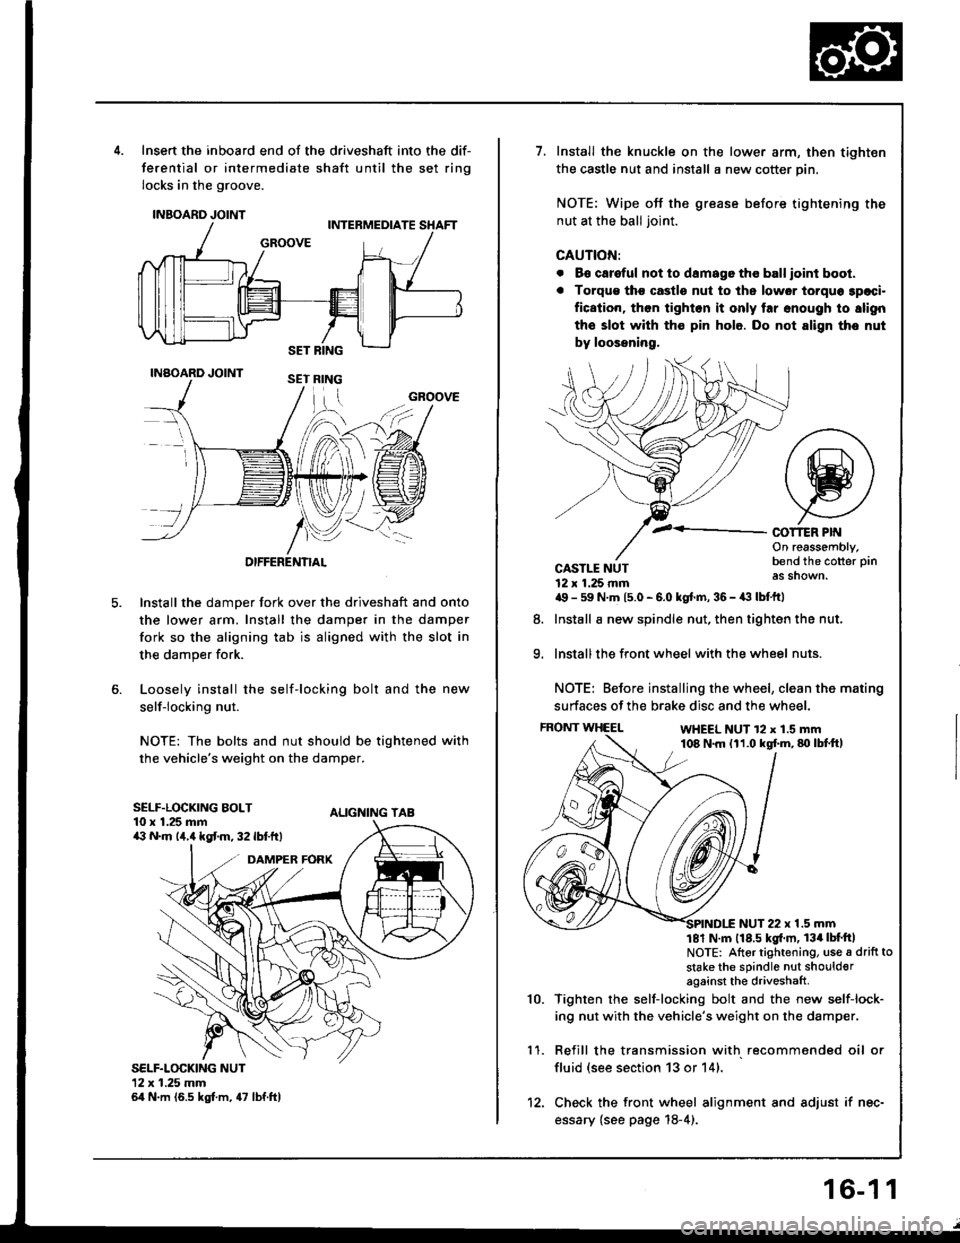 HONDA INTEGRA 1994 4.G User Guide 5.
Insert the inboard end of the driveshaft into the dif-
ferential or intermediate shaft until the set ring
locks in the groove.
INBOARD JOINT
INAOARD JOINT
OIFFERENTIAL
Install the damper fork over 